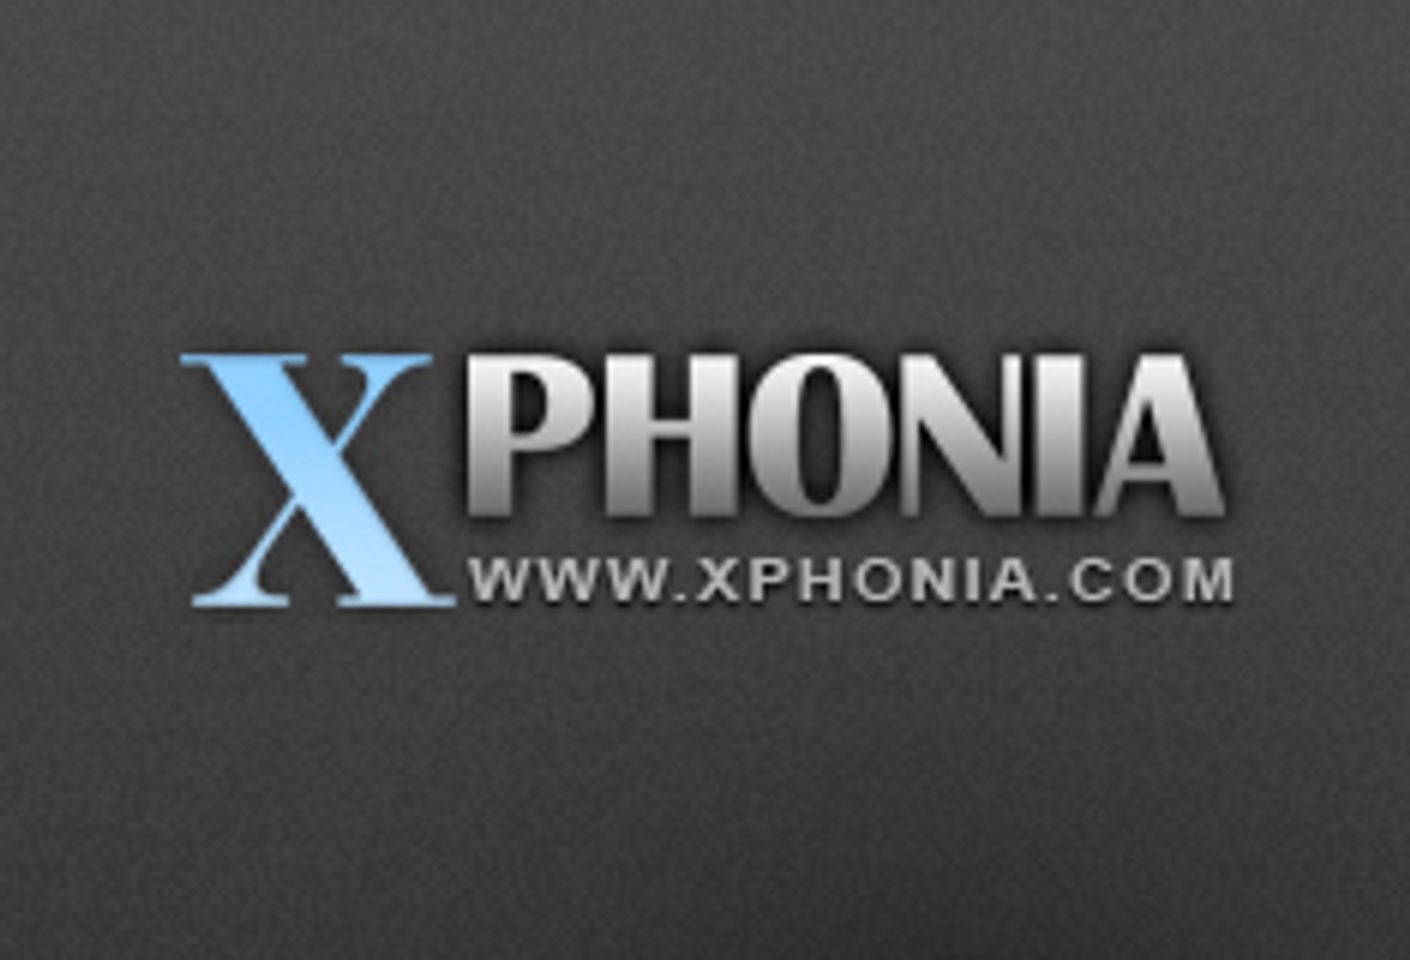 Night Mobile Launches Xphonia.com Mobile Adult Service